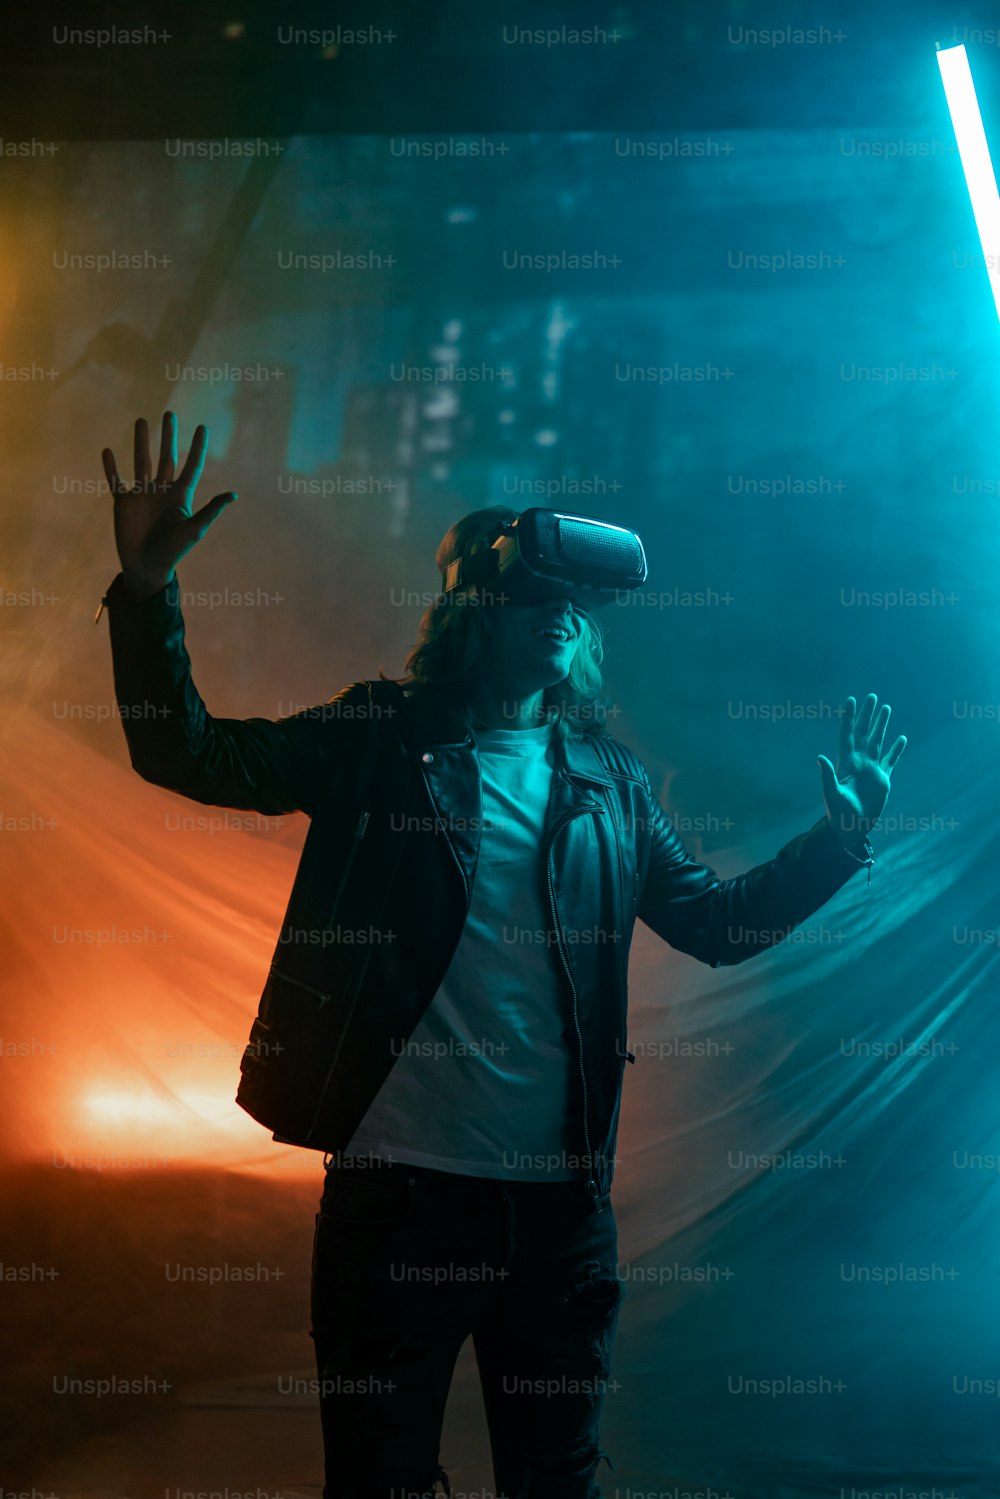 Metaverse digital cyber world technology, a man with virtual reality VR goggles playing augmented reality game, futuristic lifestyle